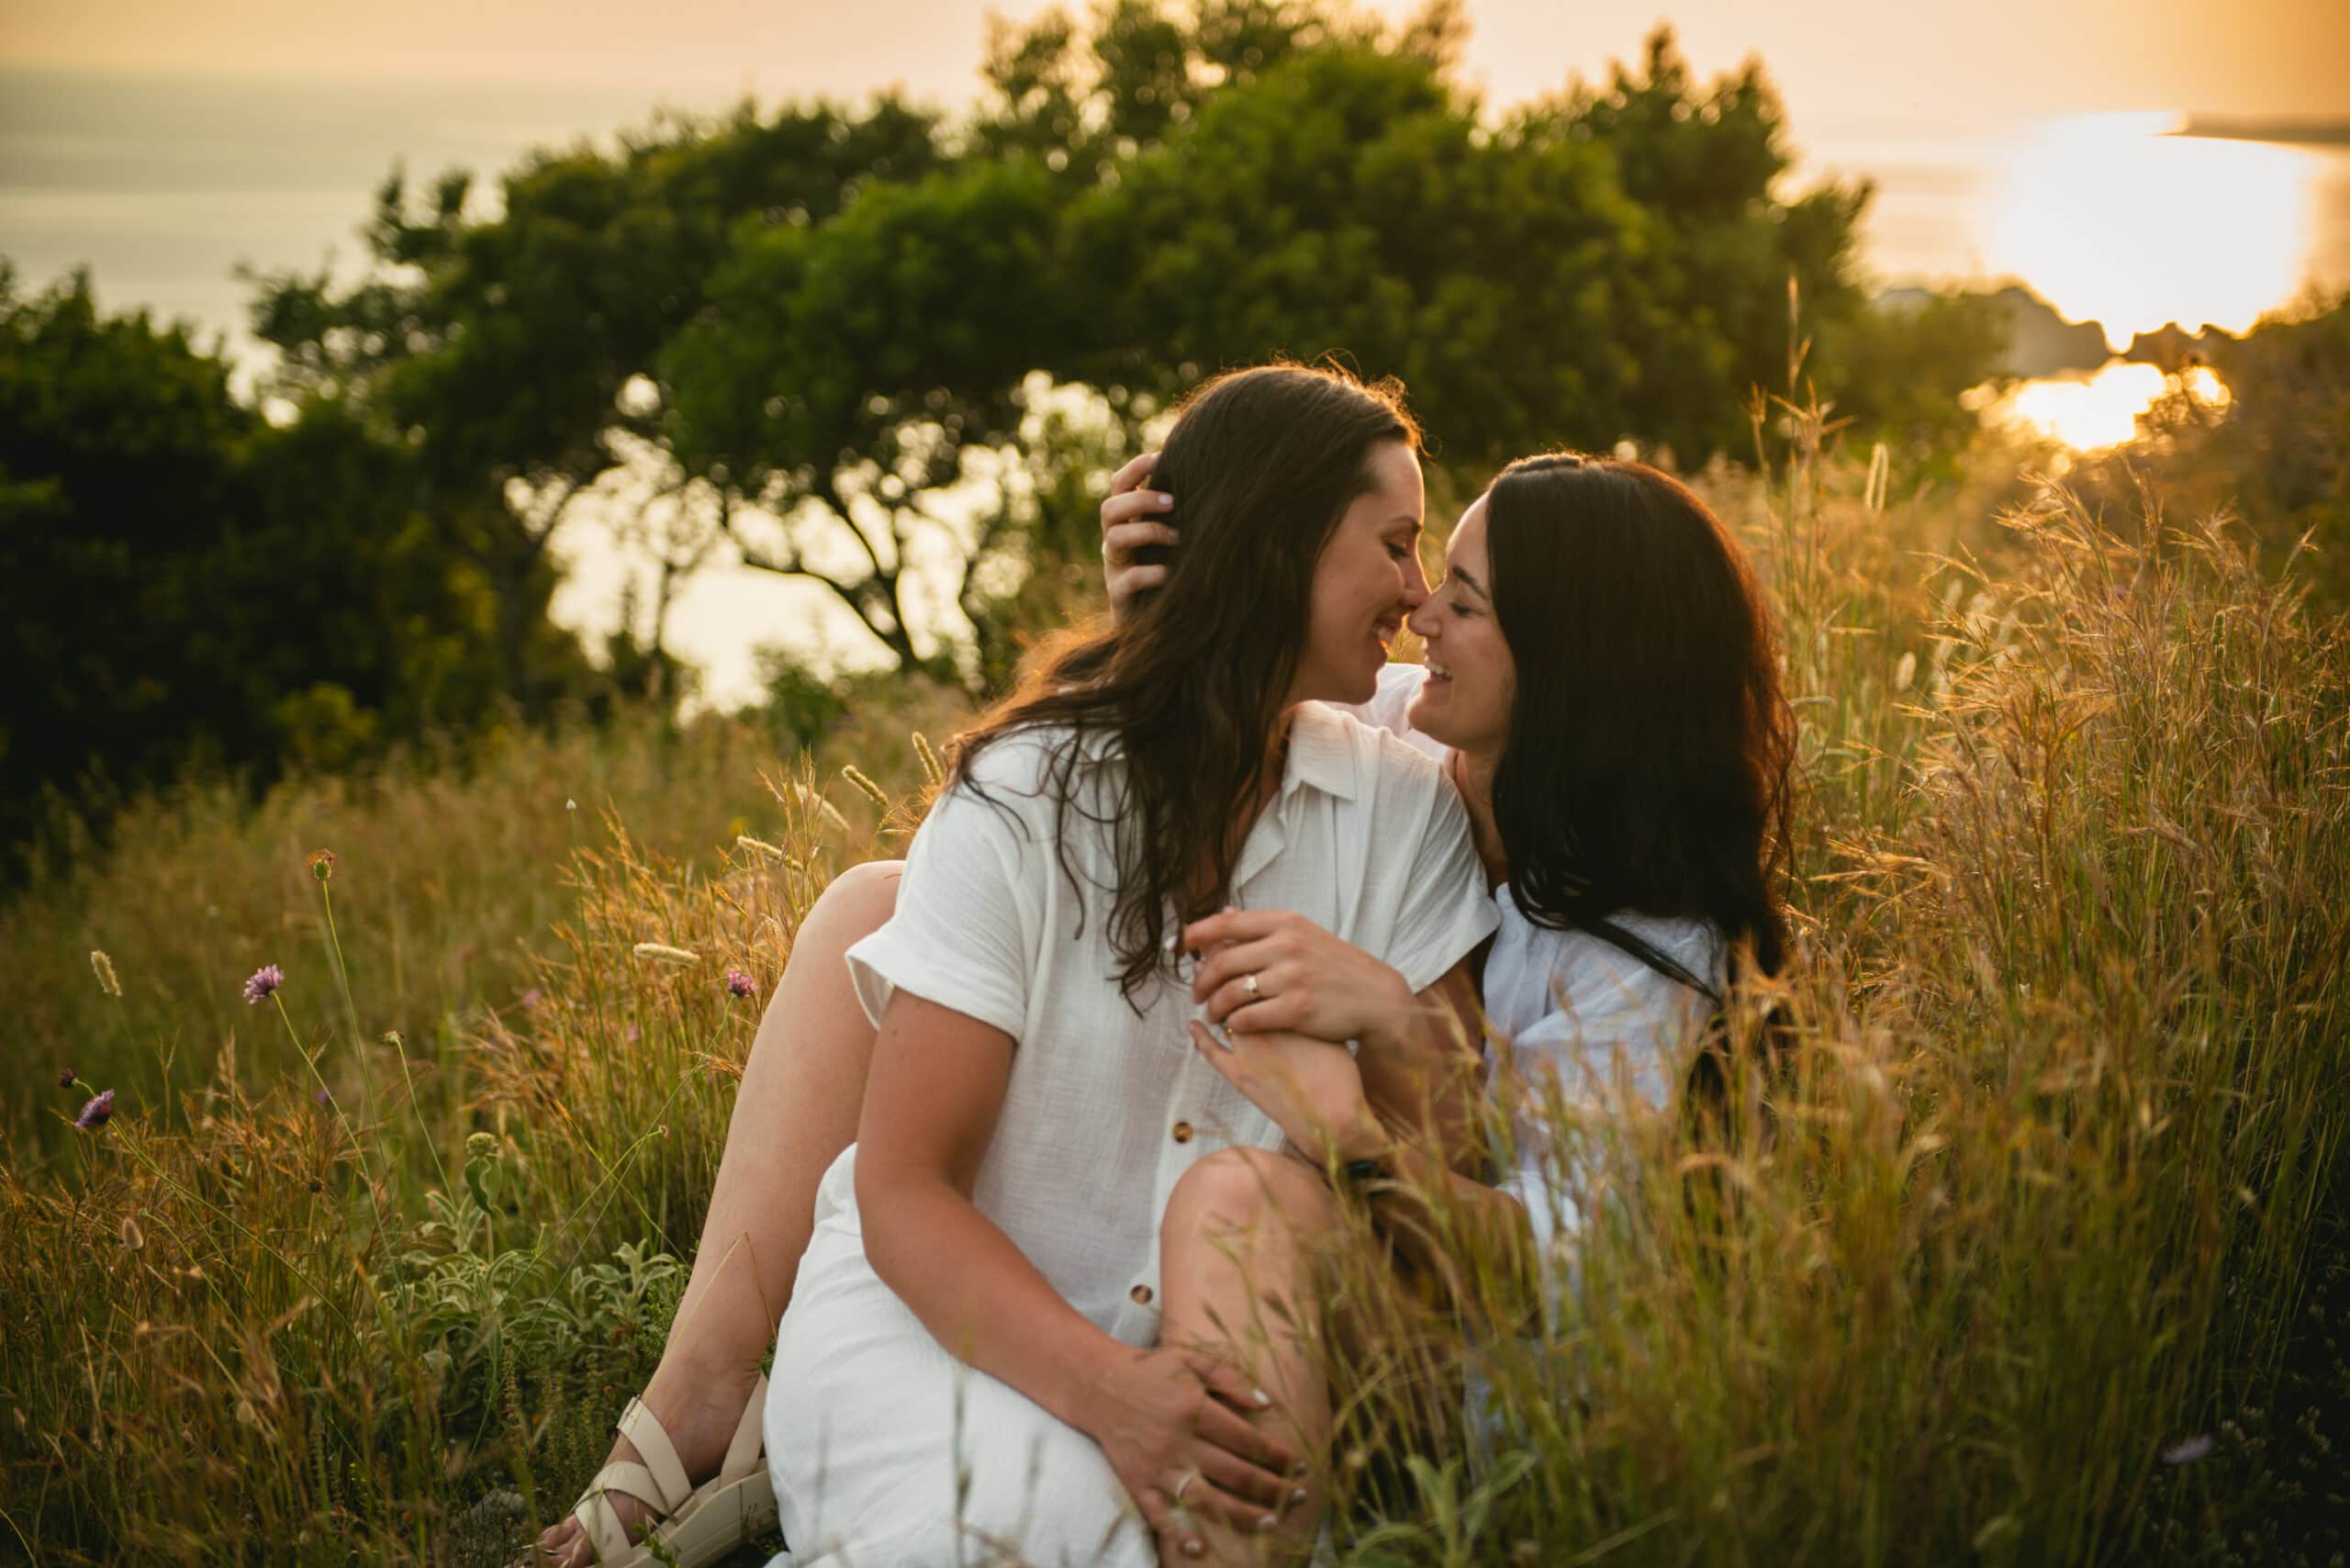 Brides overcome with laughter in the gentle embrace of the grass, adding warmth to their Corfu elopement.